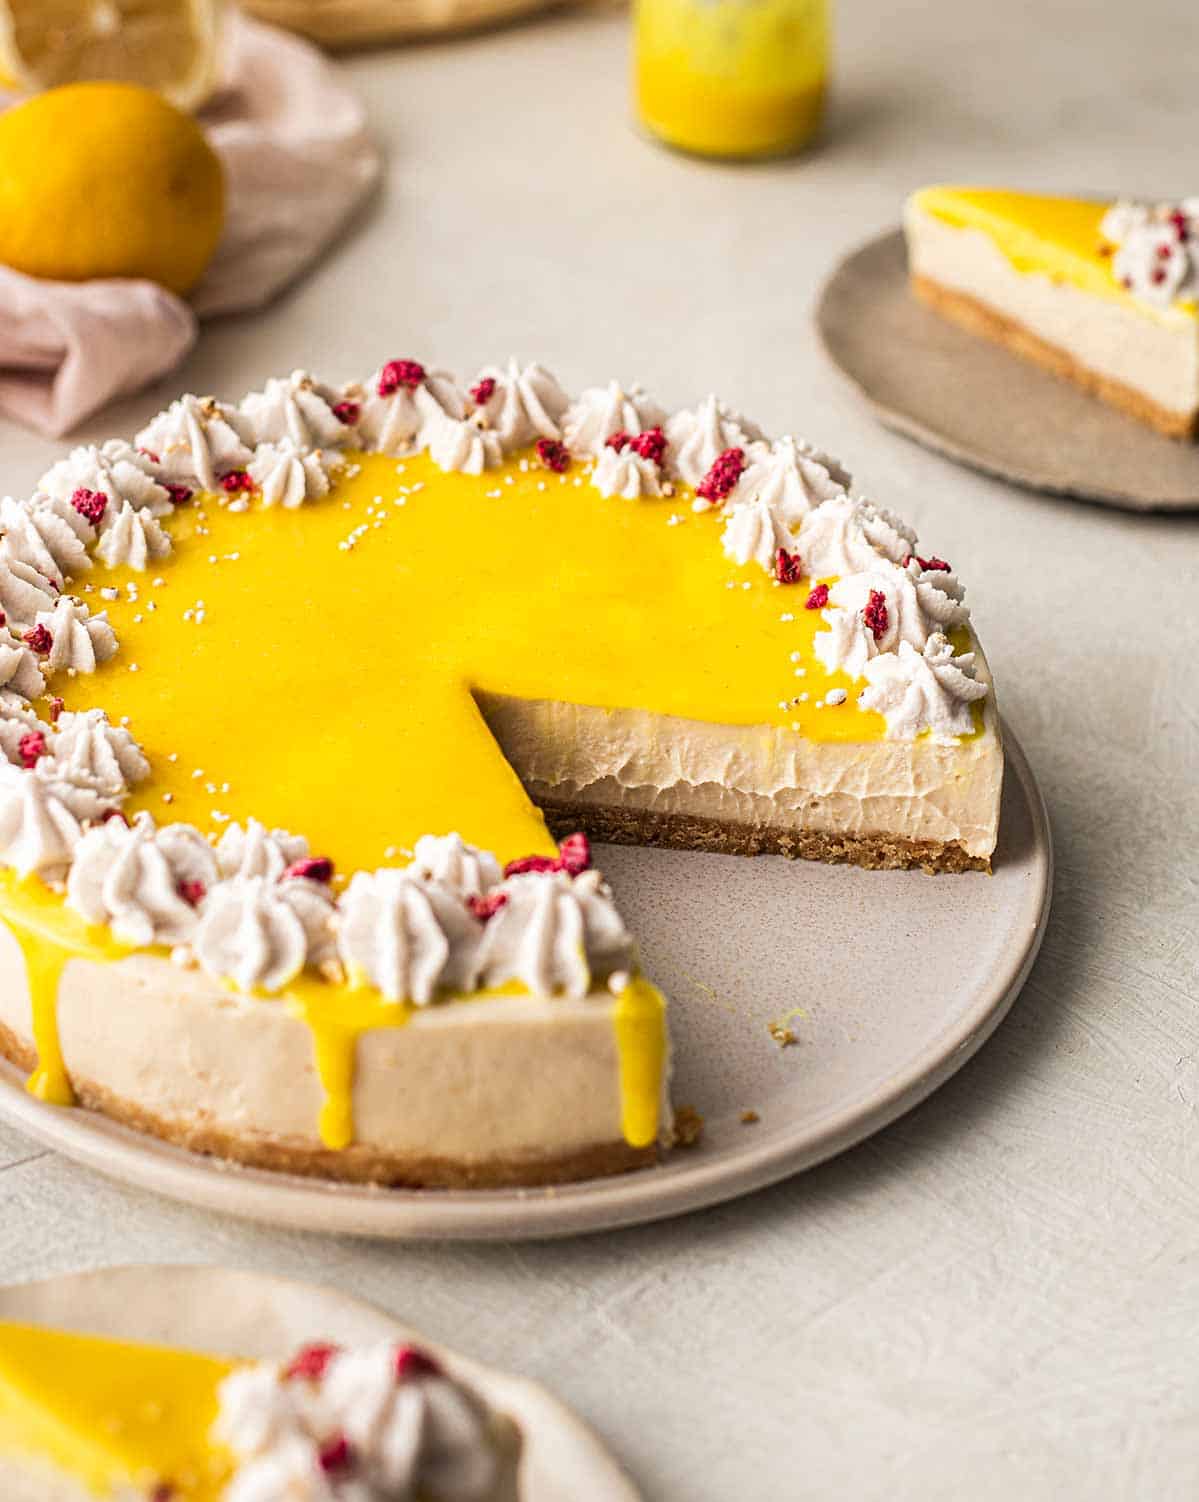 An overhead view of vegan lemon cheesecake with a missing slice that reveals its inside texture.